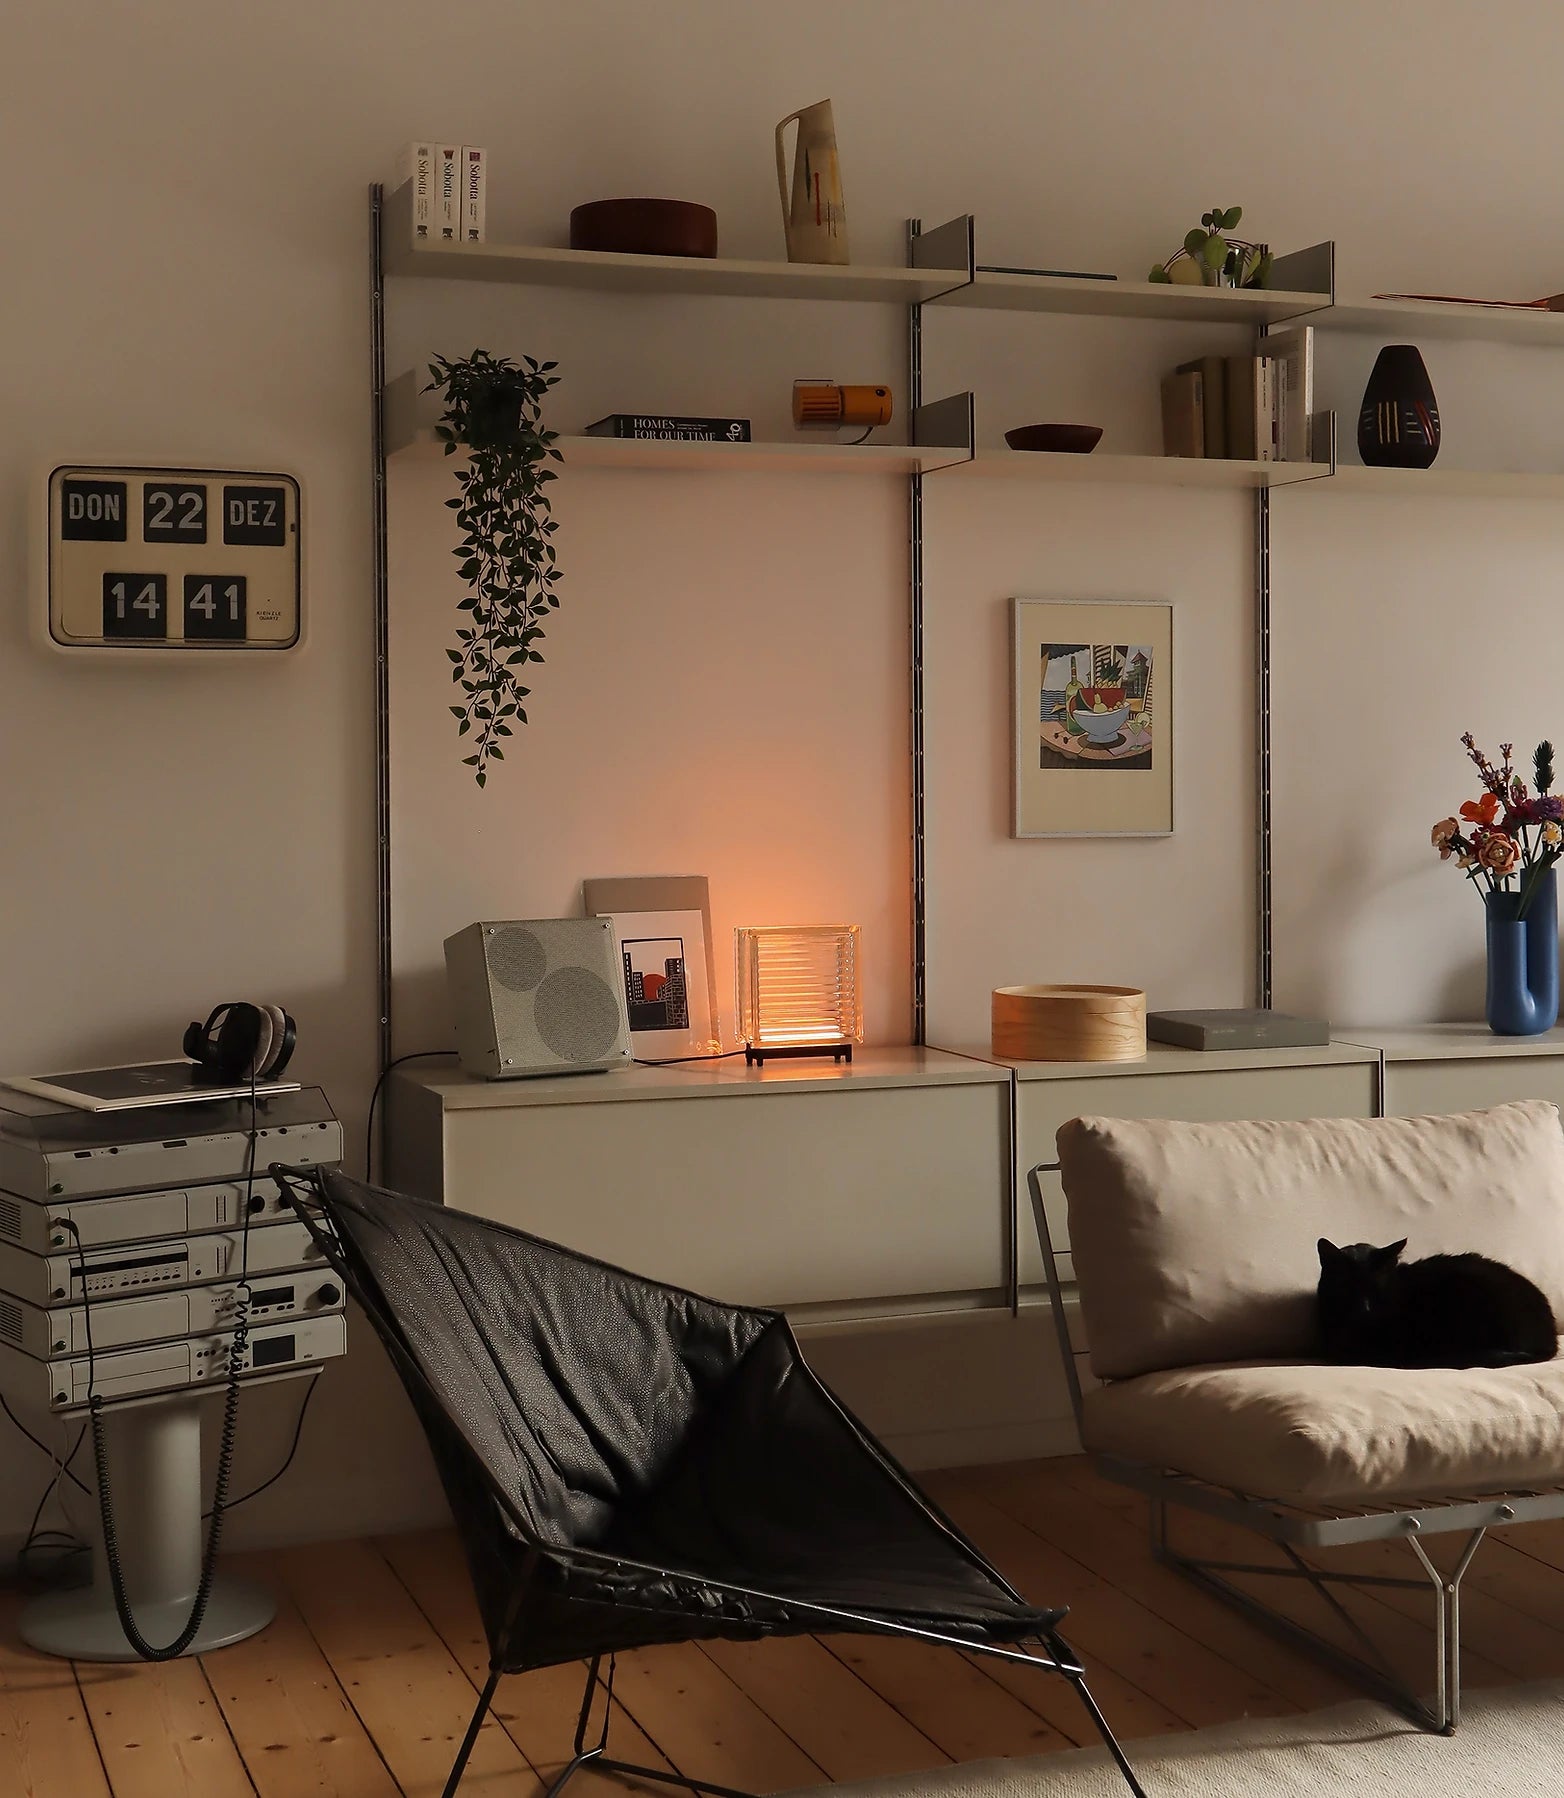 An apartment in Germany that is full of design legends.